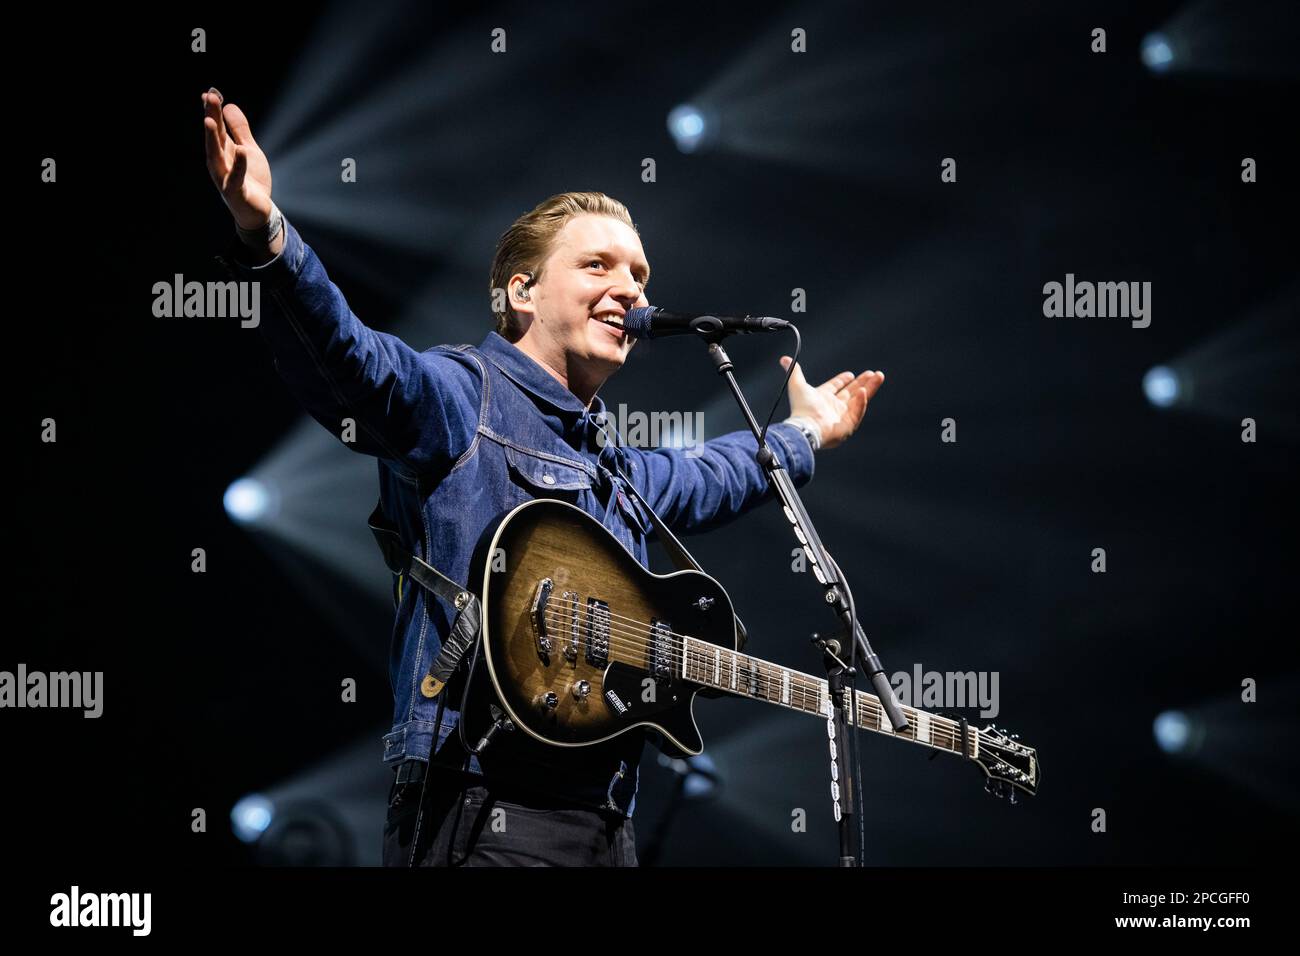 London, UK, Monday, 13th March 2023 George Ezra performs live on stage at the 02 Arena Greenwich. Credit: DavidJensen / Empics Entertainment / Alamy Live News Stock Photo